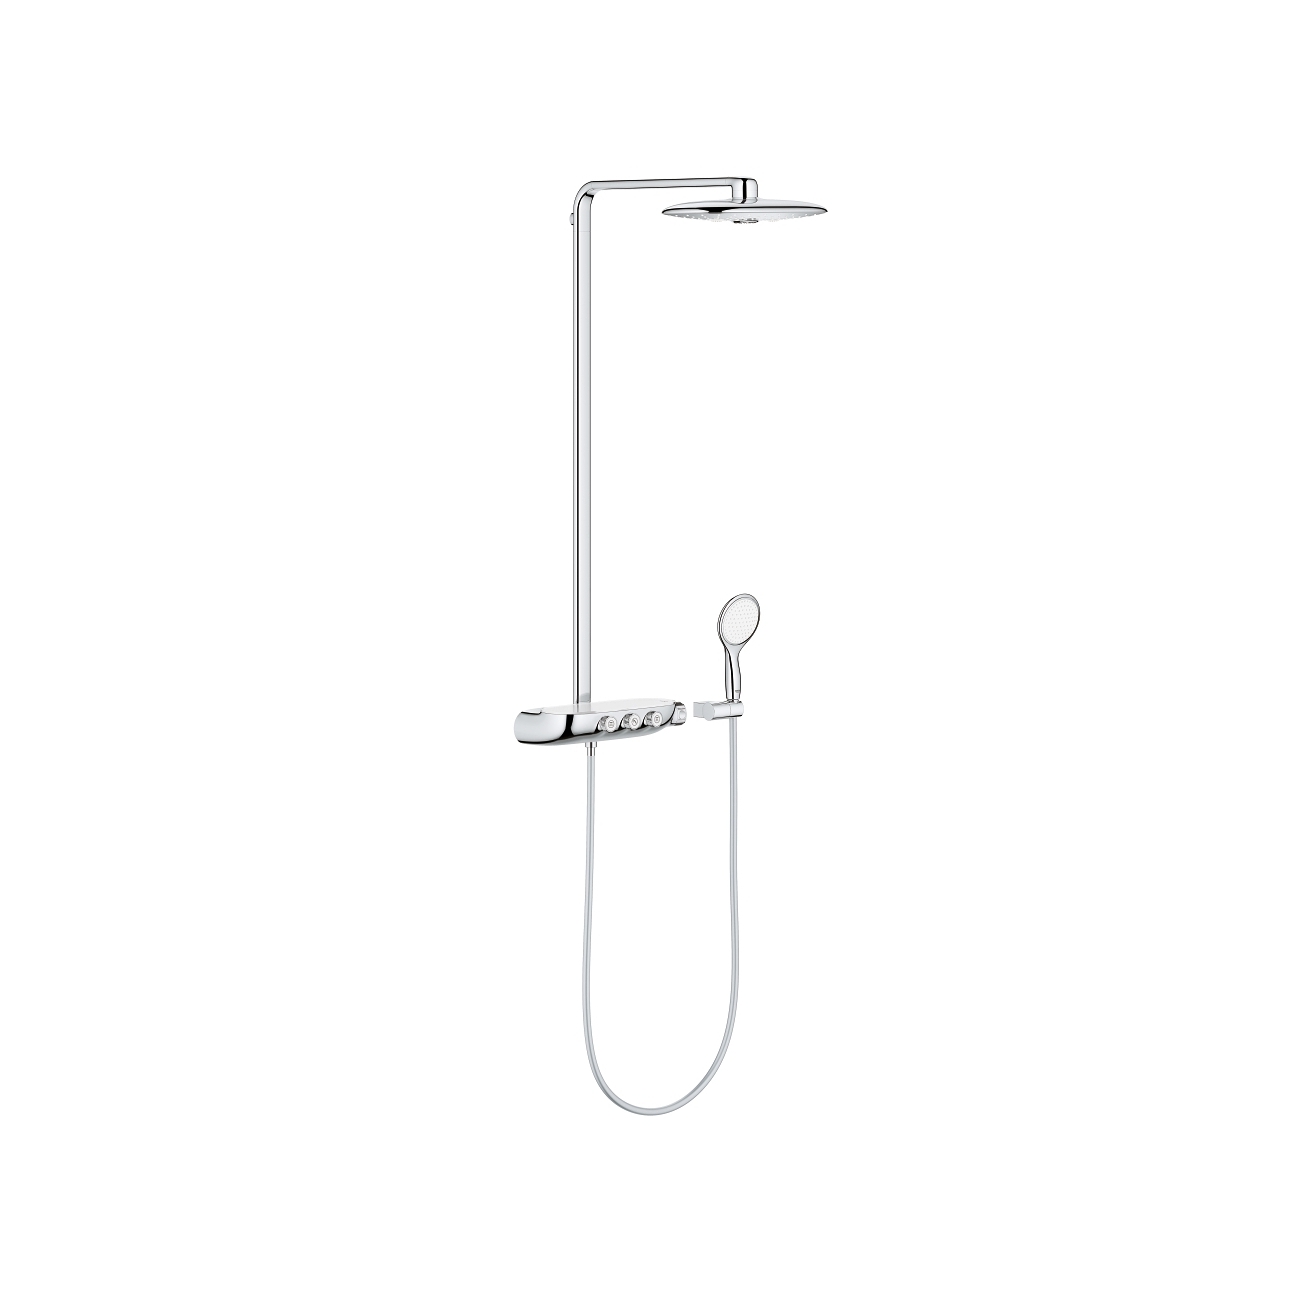 GROHE RAINSHOWER SYSTEM SMARTCONTROL WITH THERMOSTAT